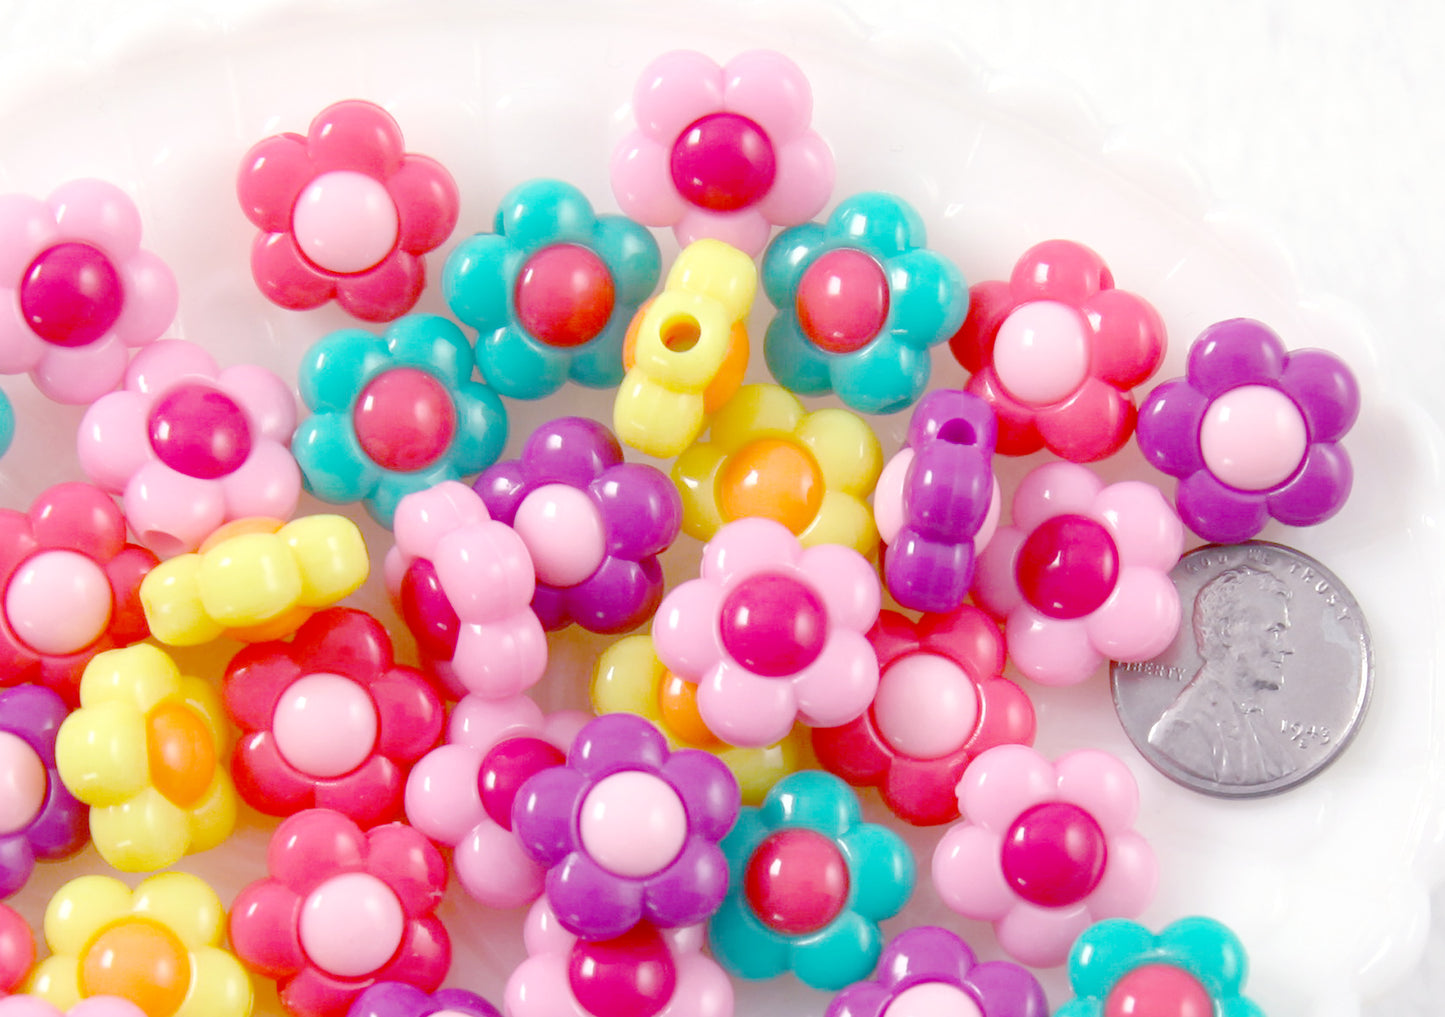 Flower Beads - 16mm Amazing Bright Color Acrylic Flower Beads